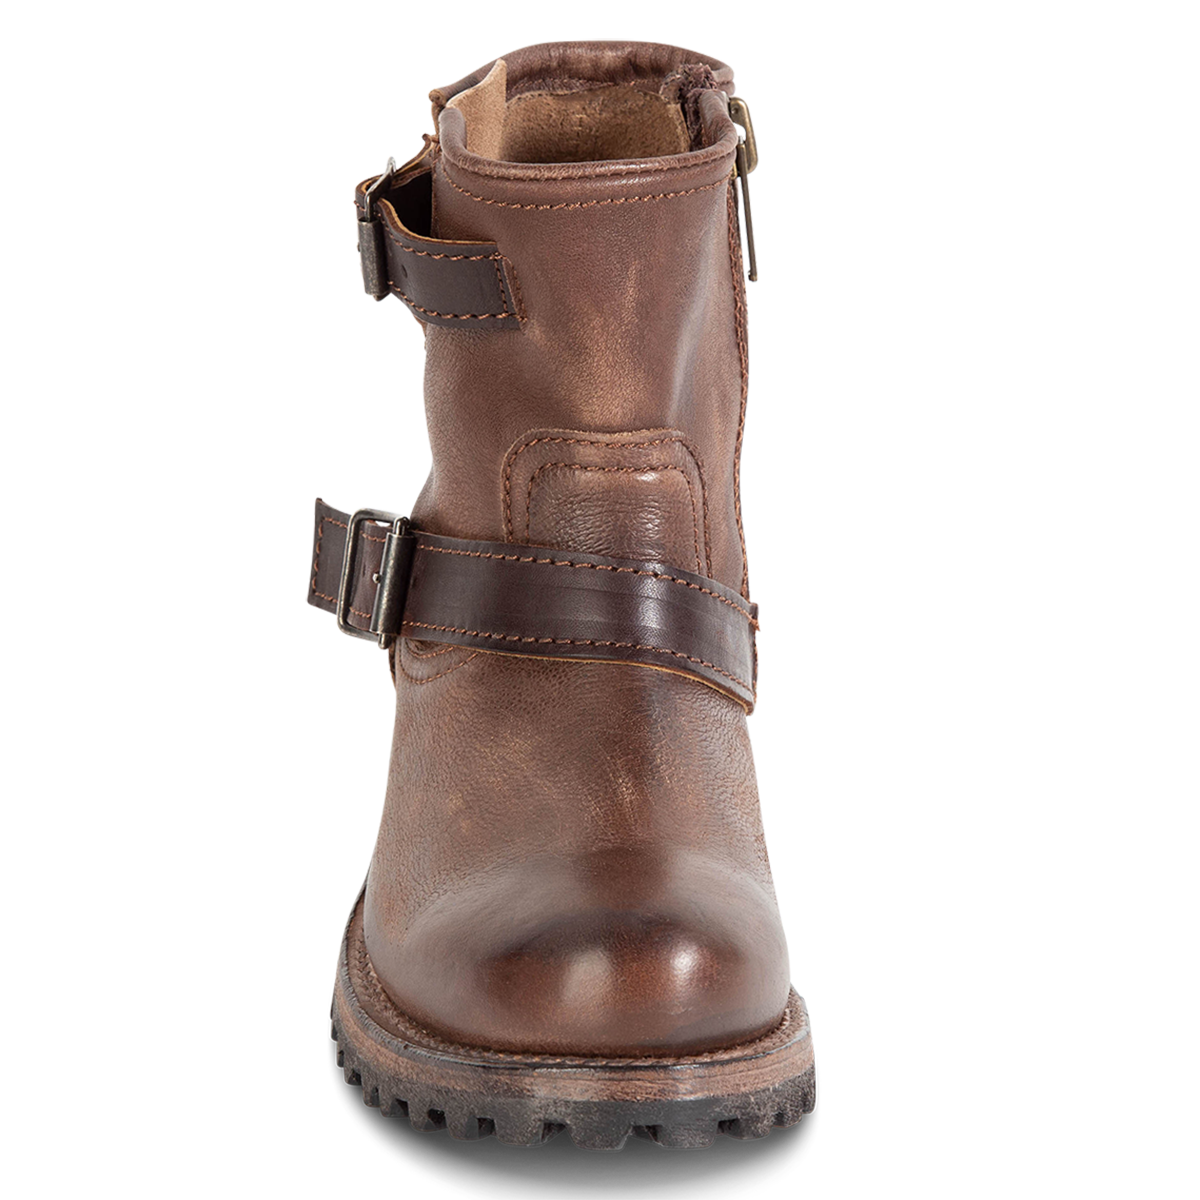 Front view showing adjustable leather buckles on FREEBIRD women's Harley brown tread sole moto ankle bootie